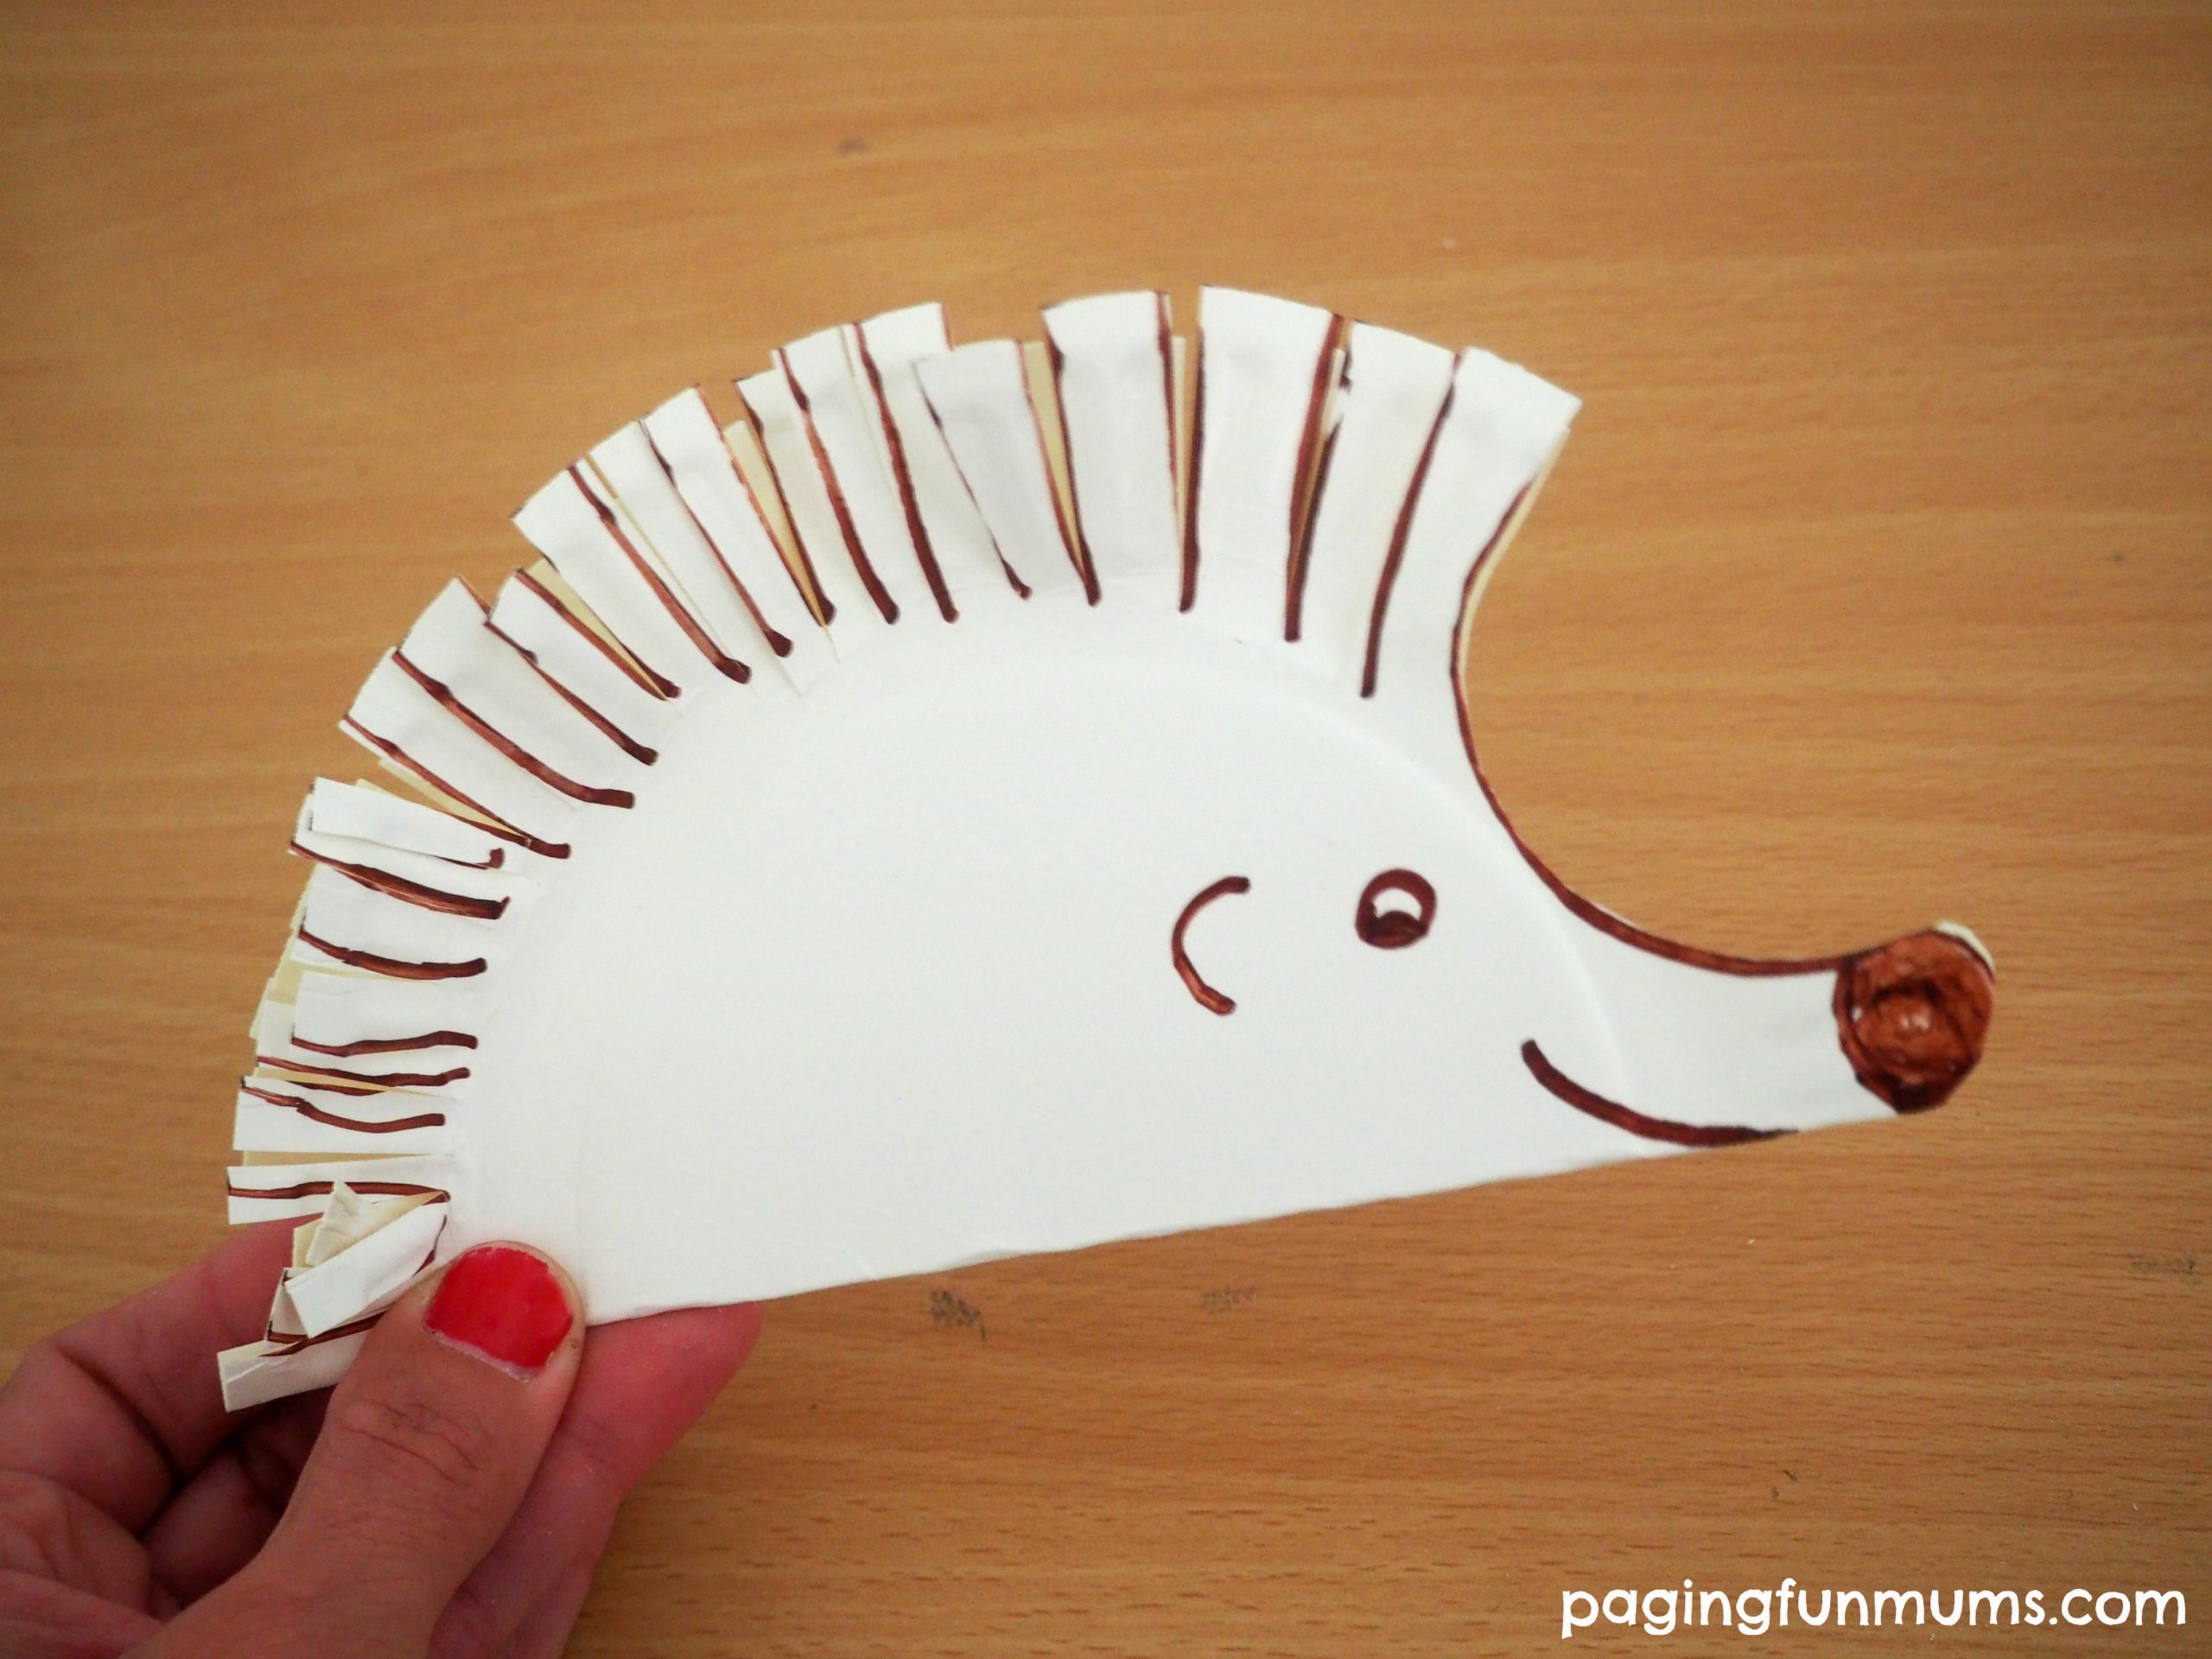 Paper Plate Hair Cuts - Toddler Activity for Scissor Skills 